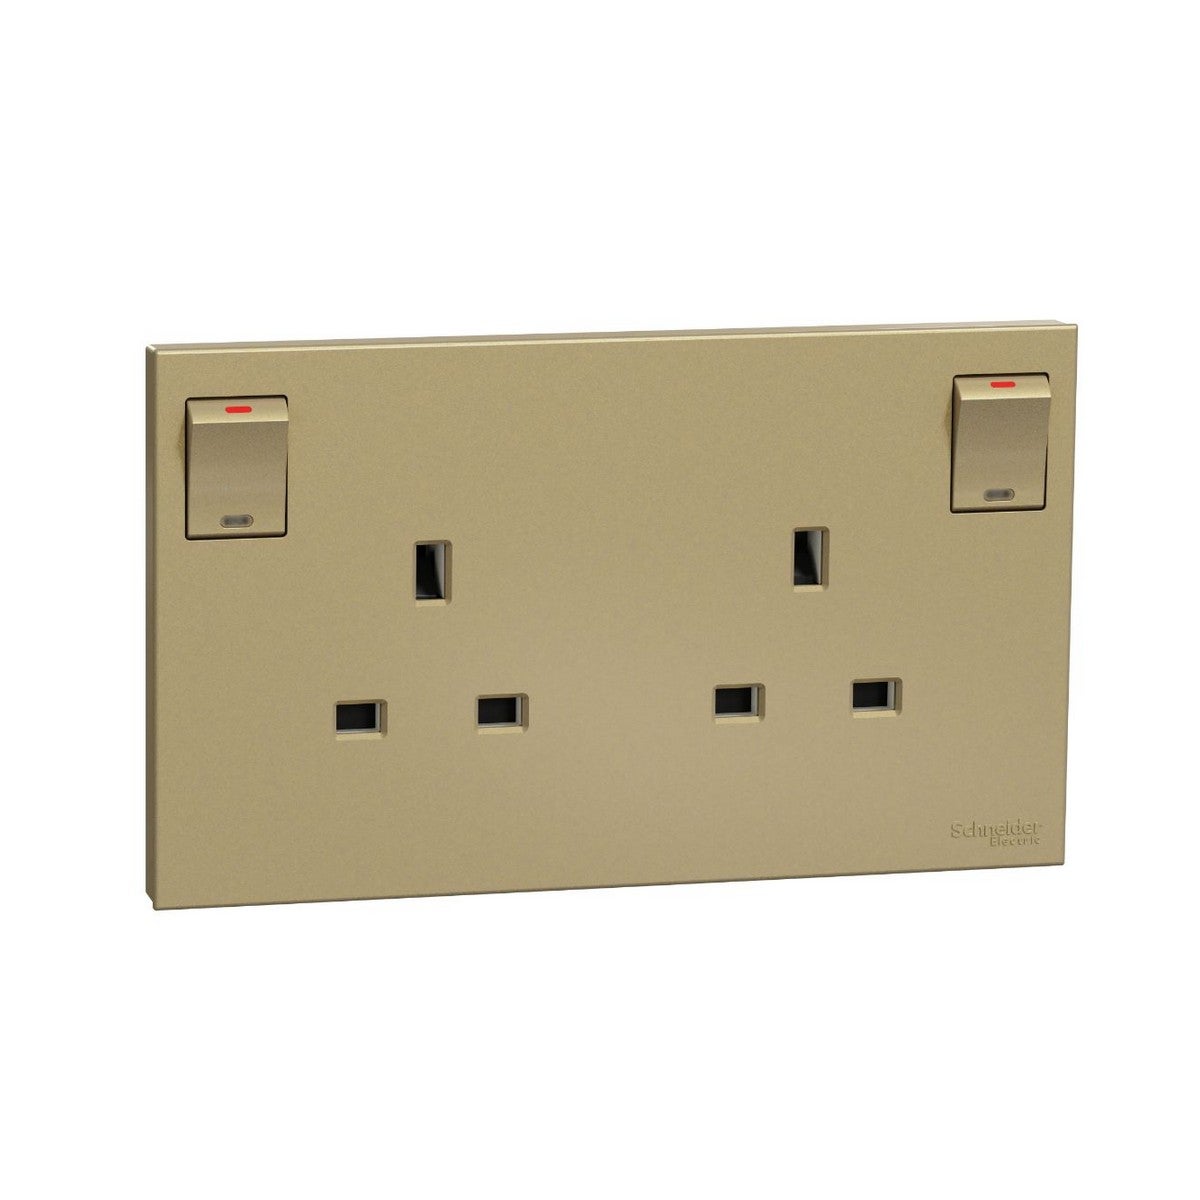 AvatarOn C, Switched socket, 13A 250V, 2 gang, with LED, wine gold